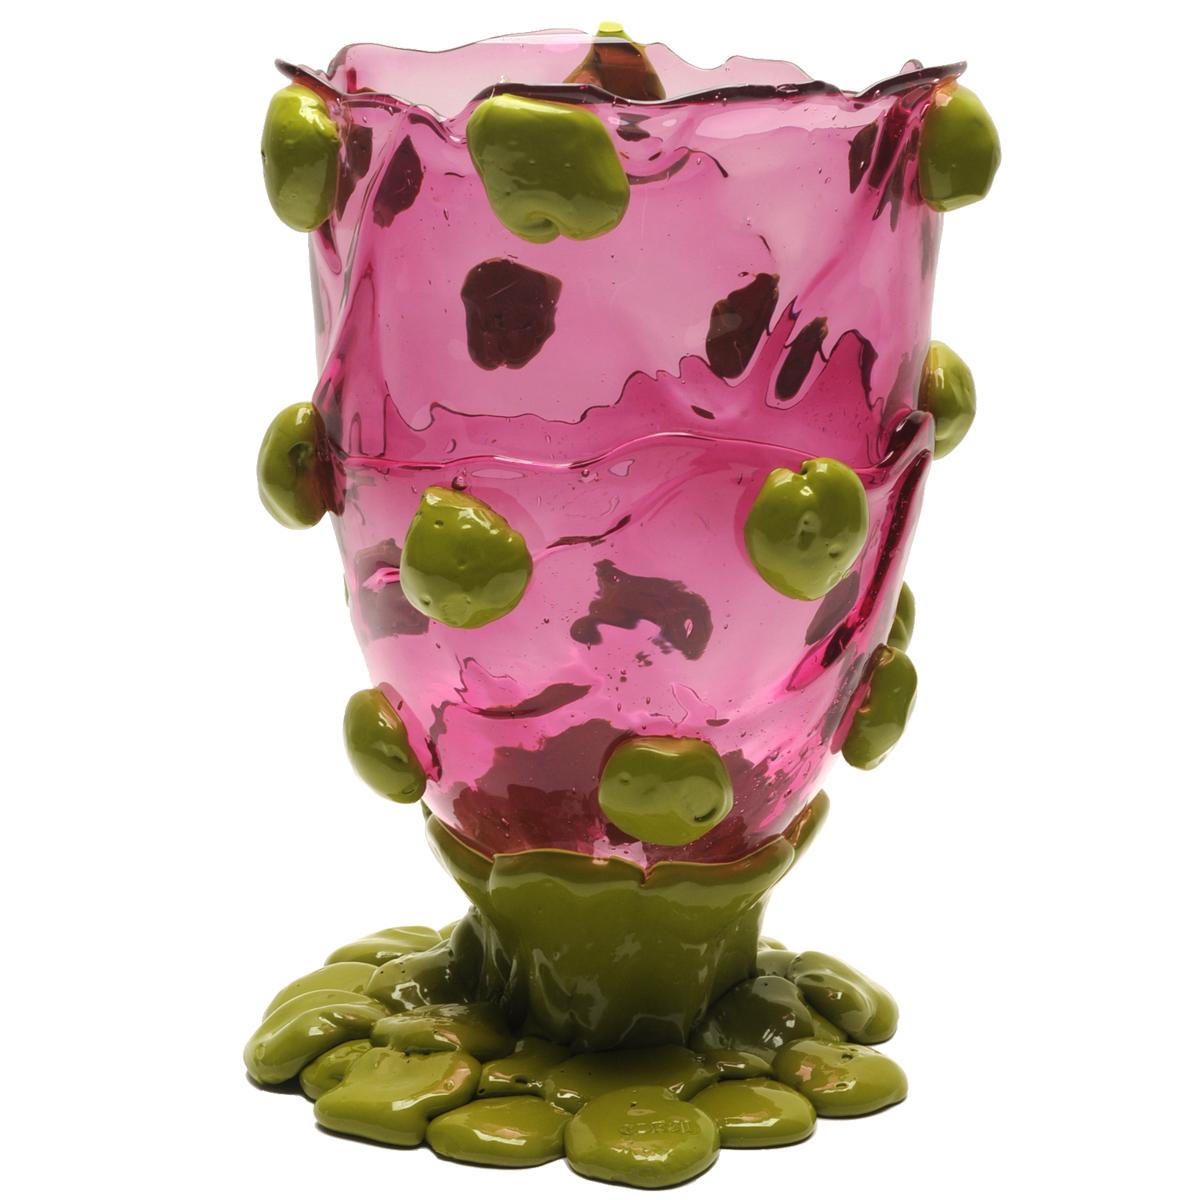 Nugget vase, clear light fuchsia, matt dust green.
Vase in soft resin designed by Gaetano Pesce in 1995 for Fish Design collection.

Measures: XL - ø 30cm x H 56cm
Colours: clear light fuchsia, matt dust green.
Other sizes available.
Vase in